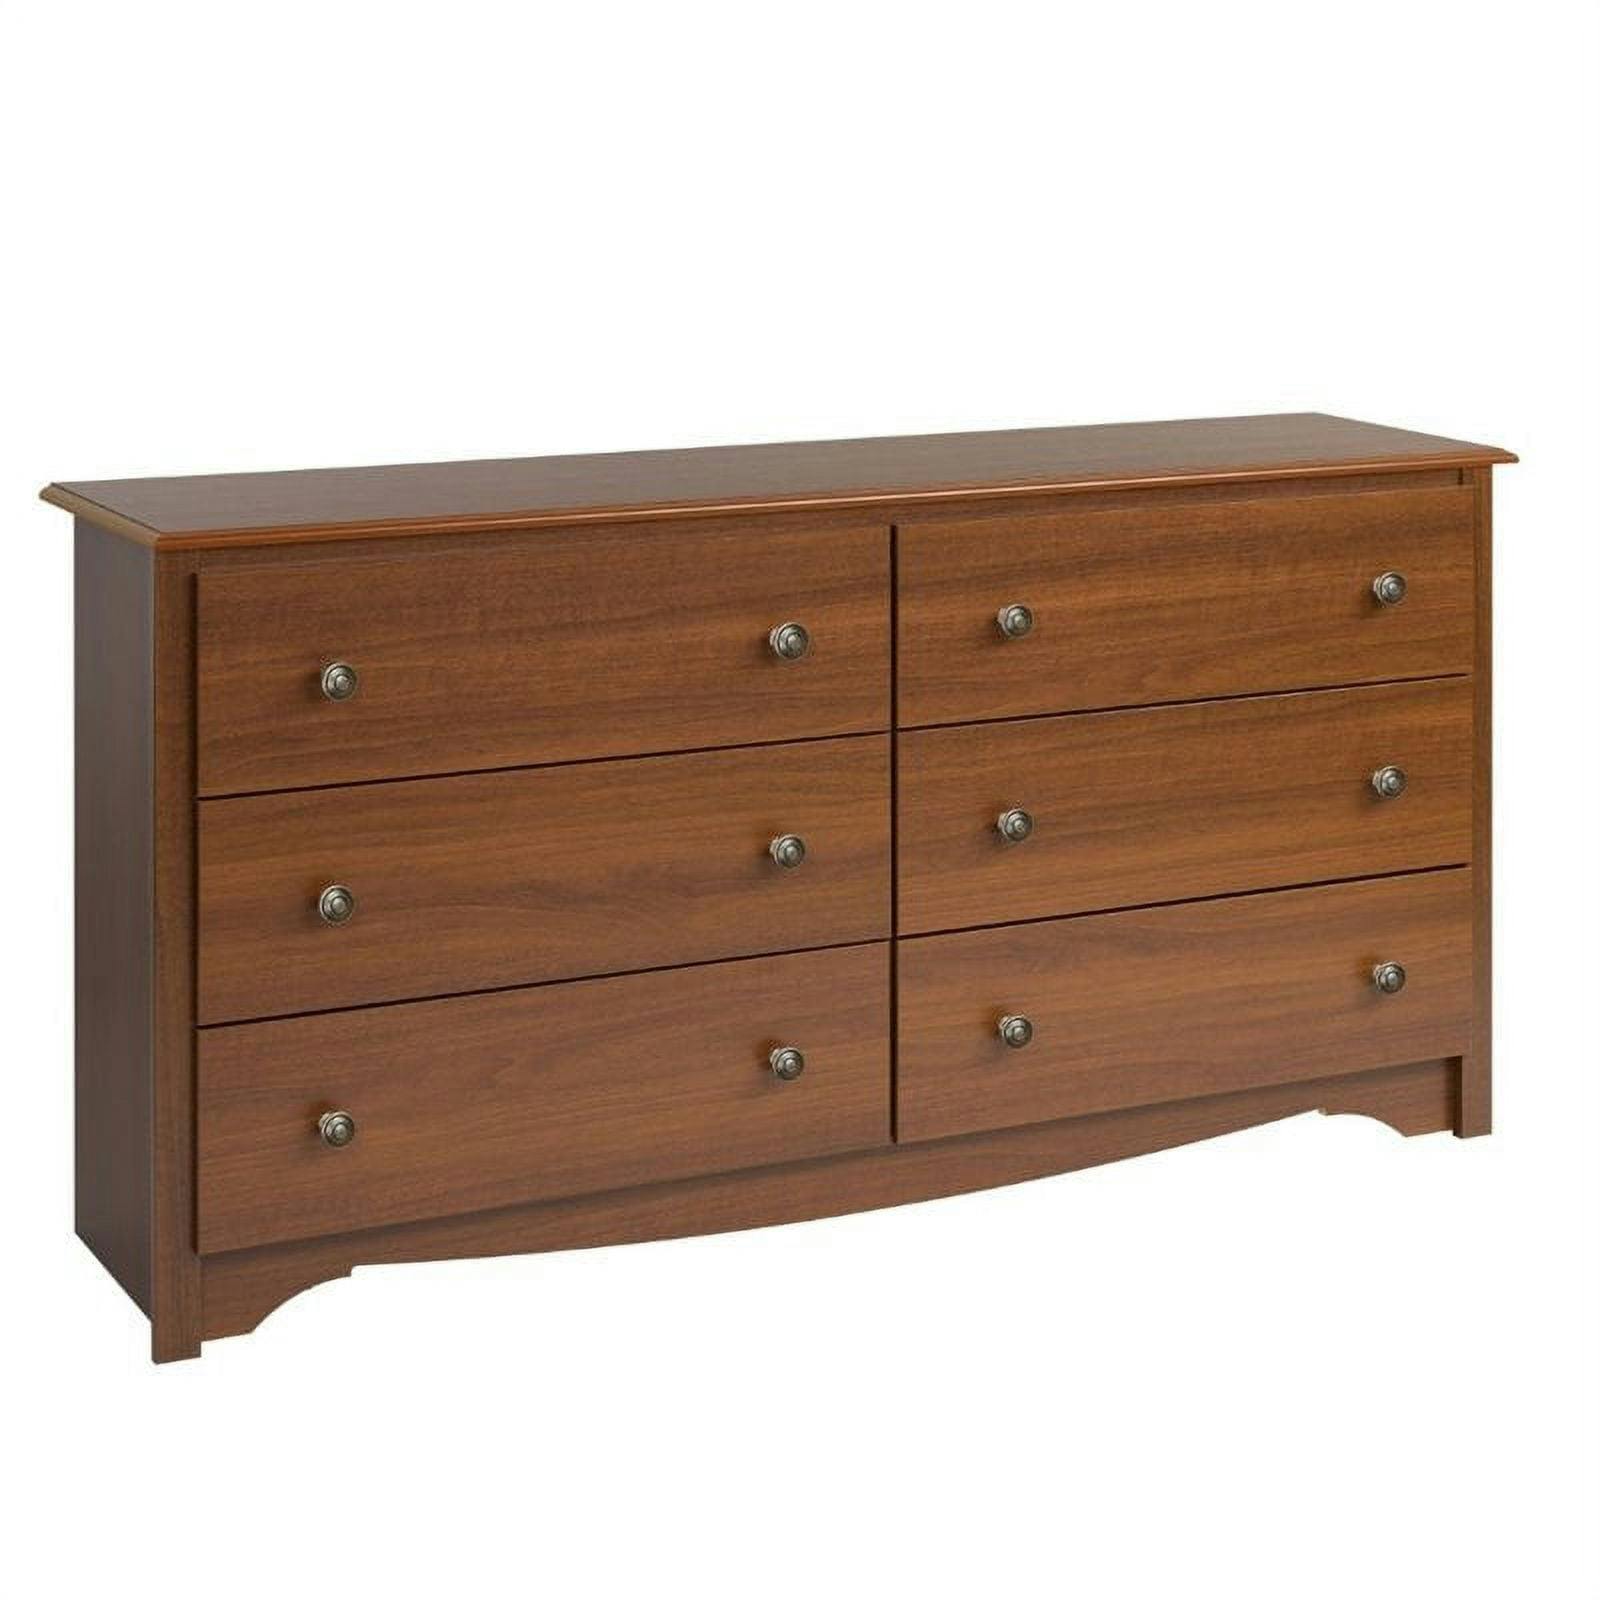 Cherry Monterey 68" Double Dresser with Scalloped Apron